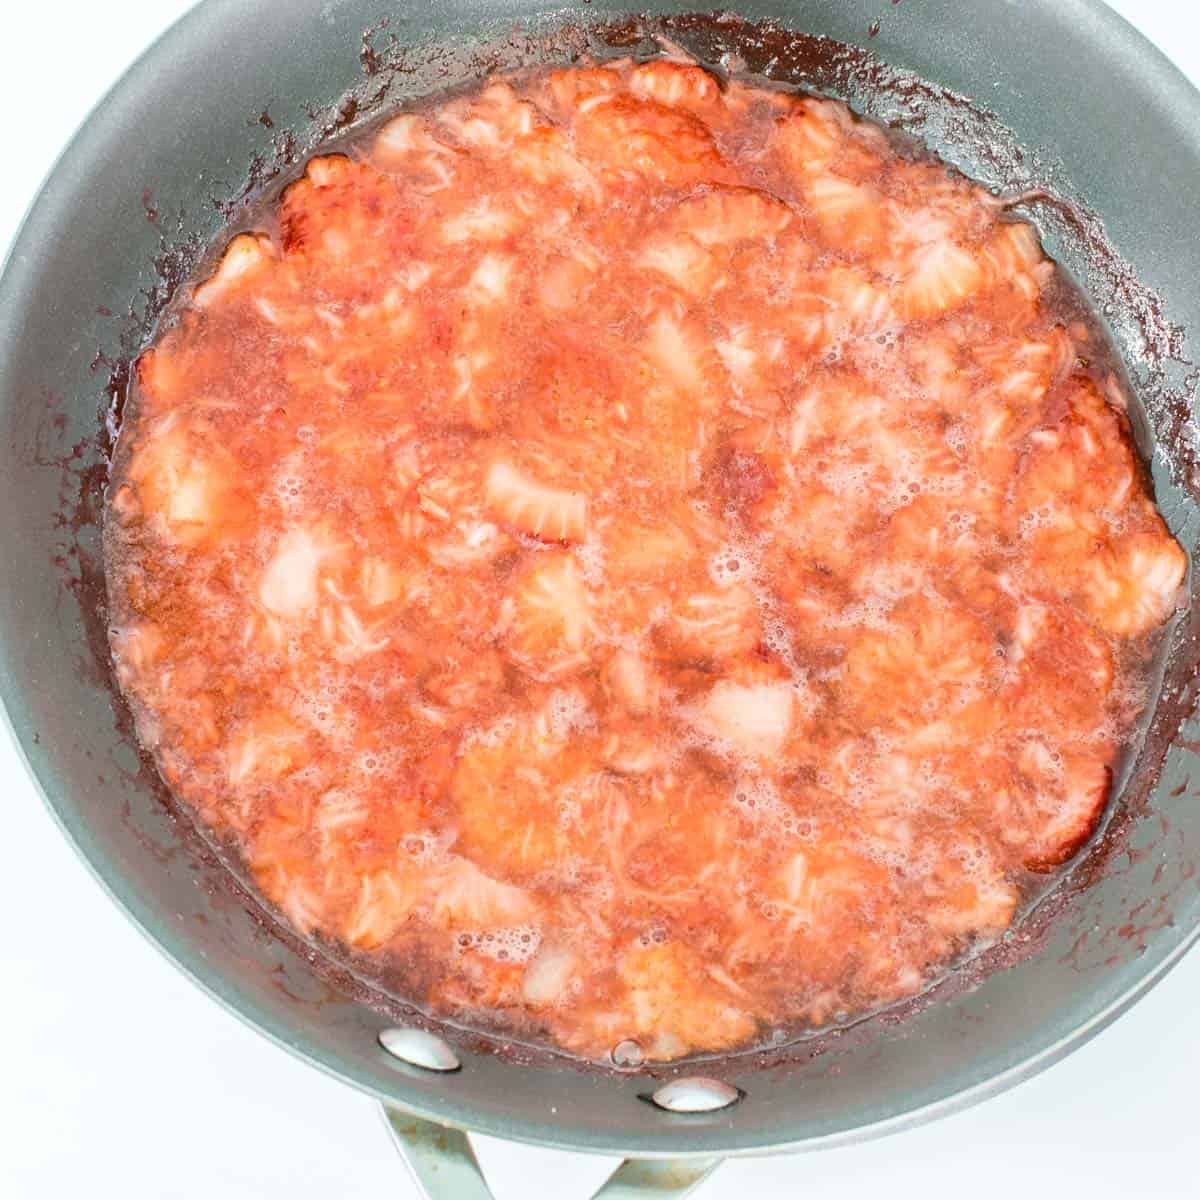 cooked strawberry sauce in the pan.